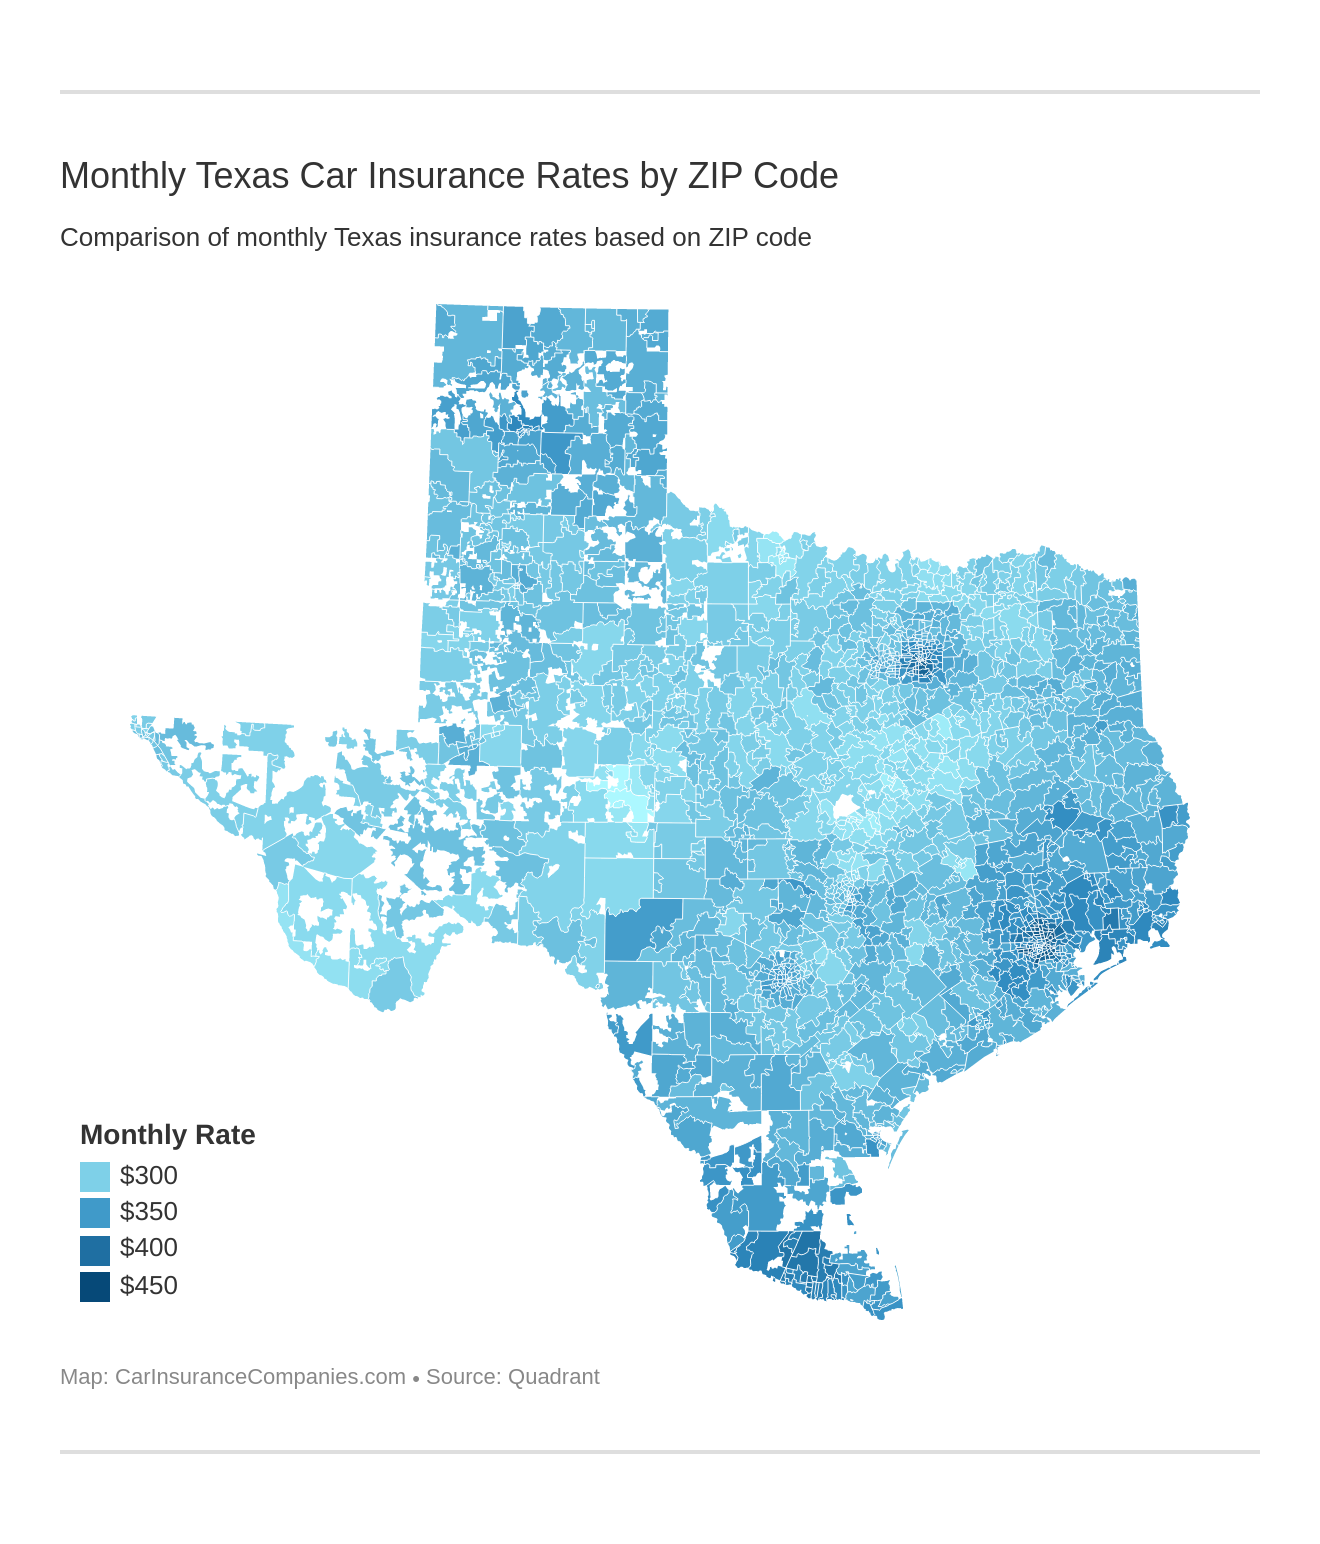 Monthly Texas Car Insurance Rates by ZIP Code